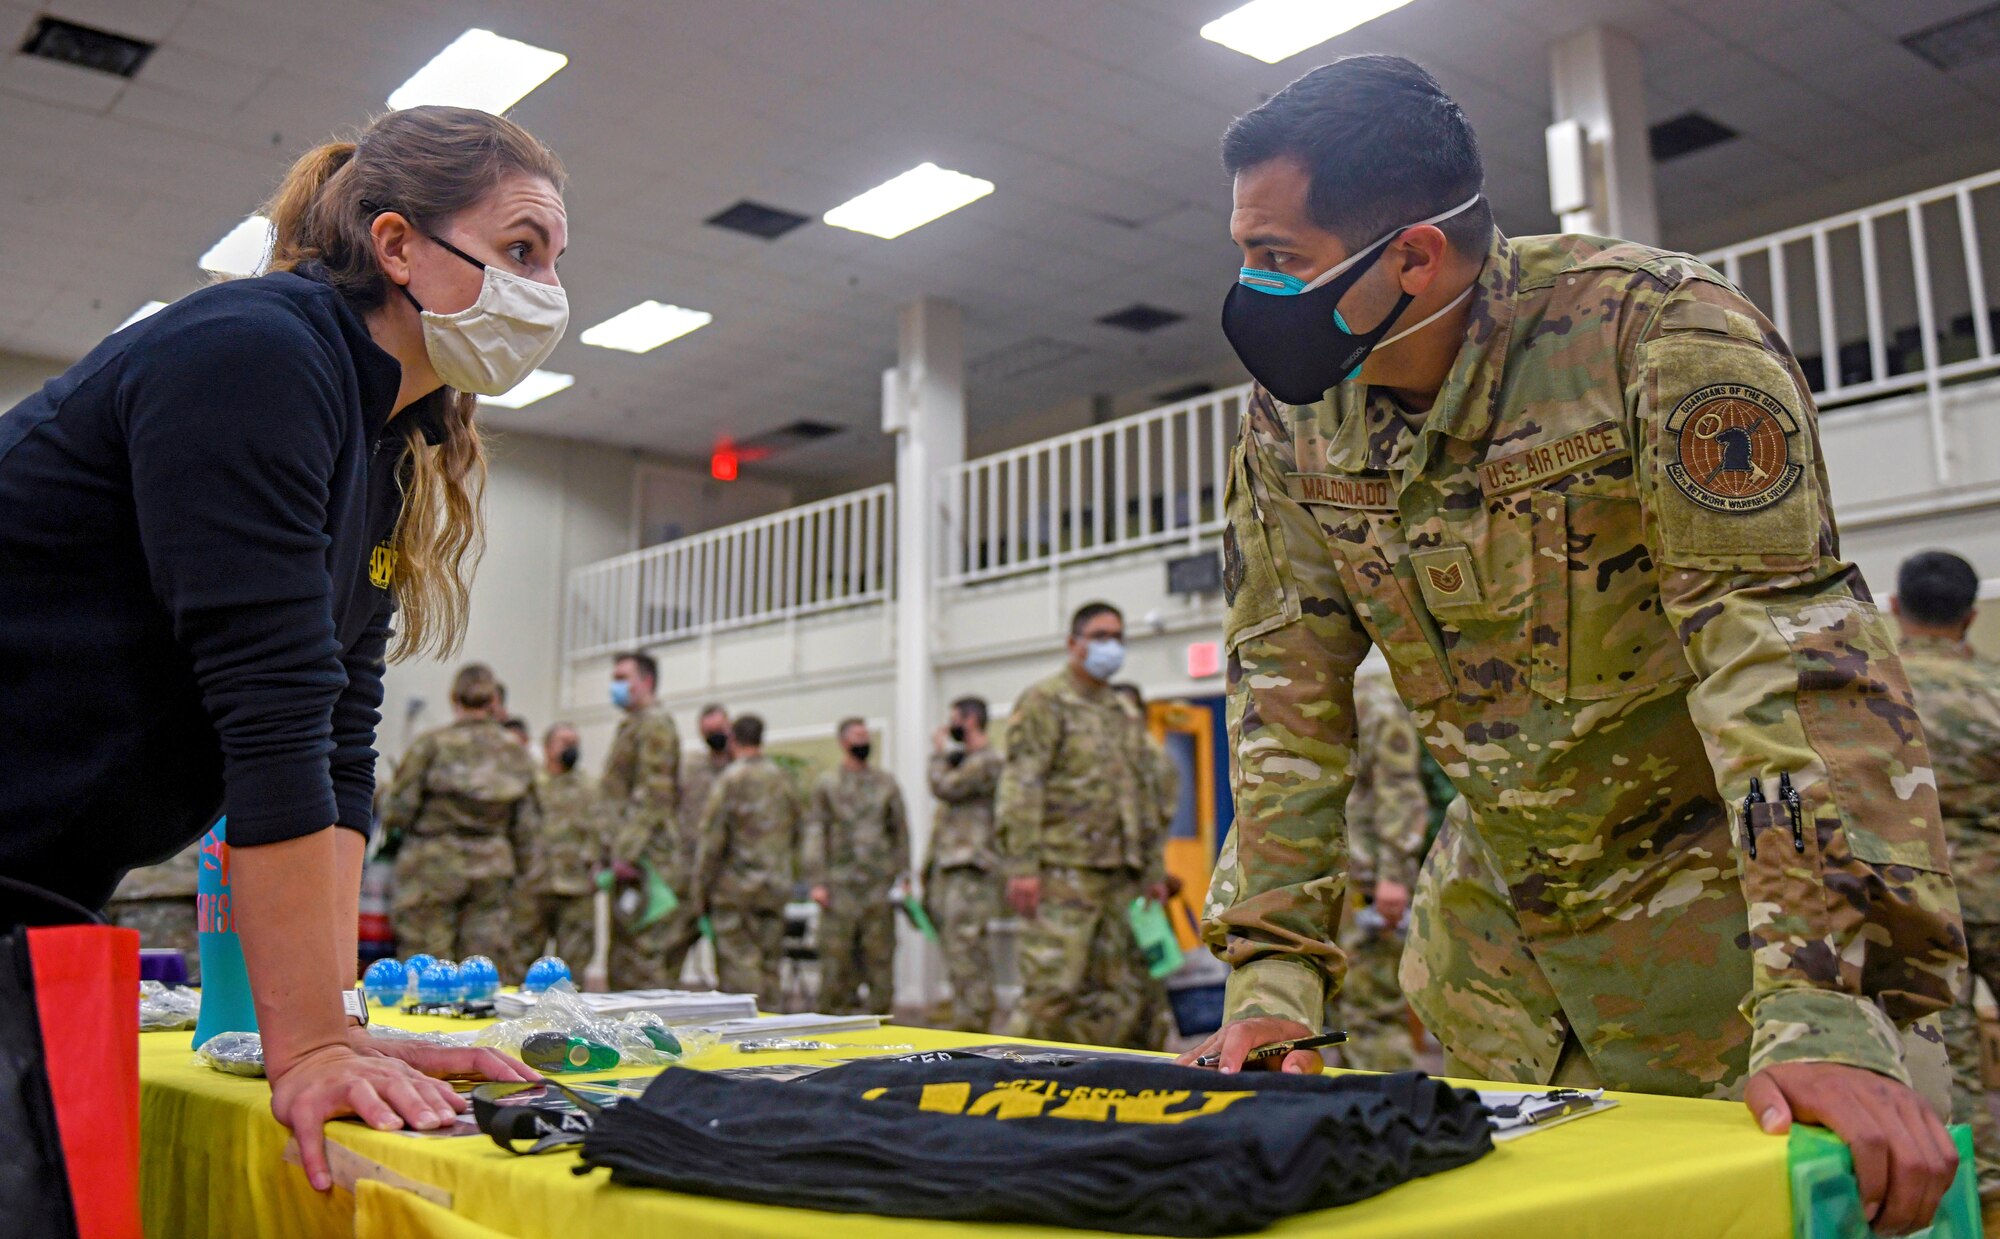 Kristen Myers, Ft. Sam Houston Army Wellness Center health education advocate, talks about physical health and fitness with Tech. Sgt. Damon Maldonado, 426th Network Warfare Squadron cyber warfare operator, during the 960th Cyberspace Wing Mental Health and Resiliency Fair, May 1, 2021, at Joint Base San Antonio-Lackland, Texas. (U.S. Air Force photo by Airman First Class Tyler McQuiston)